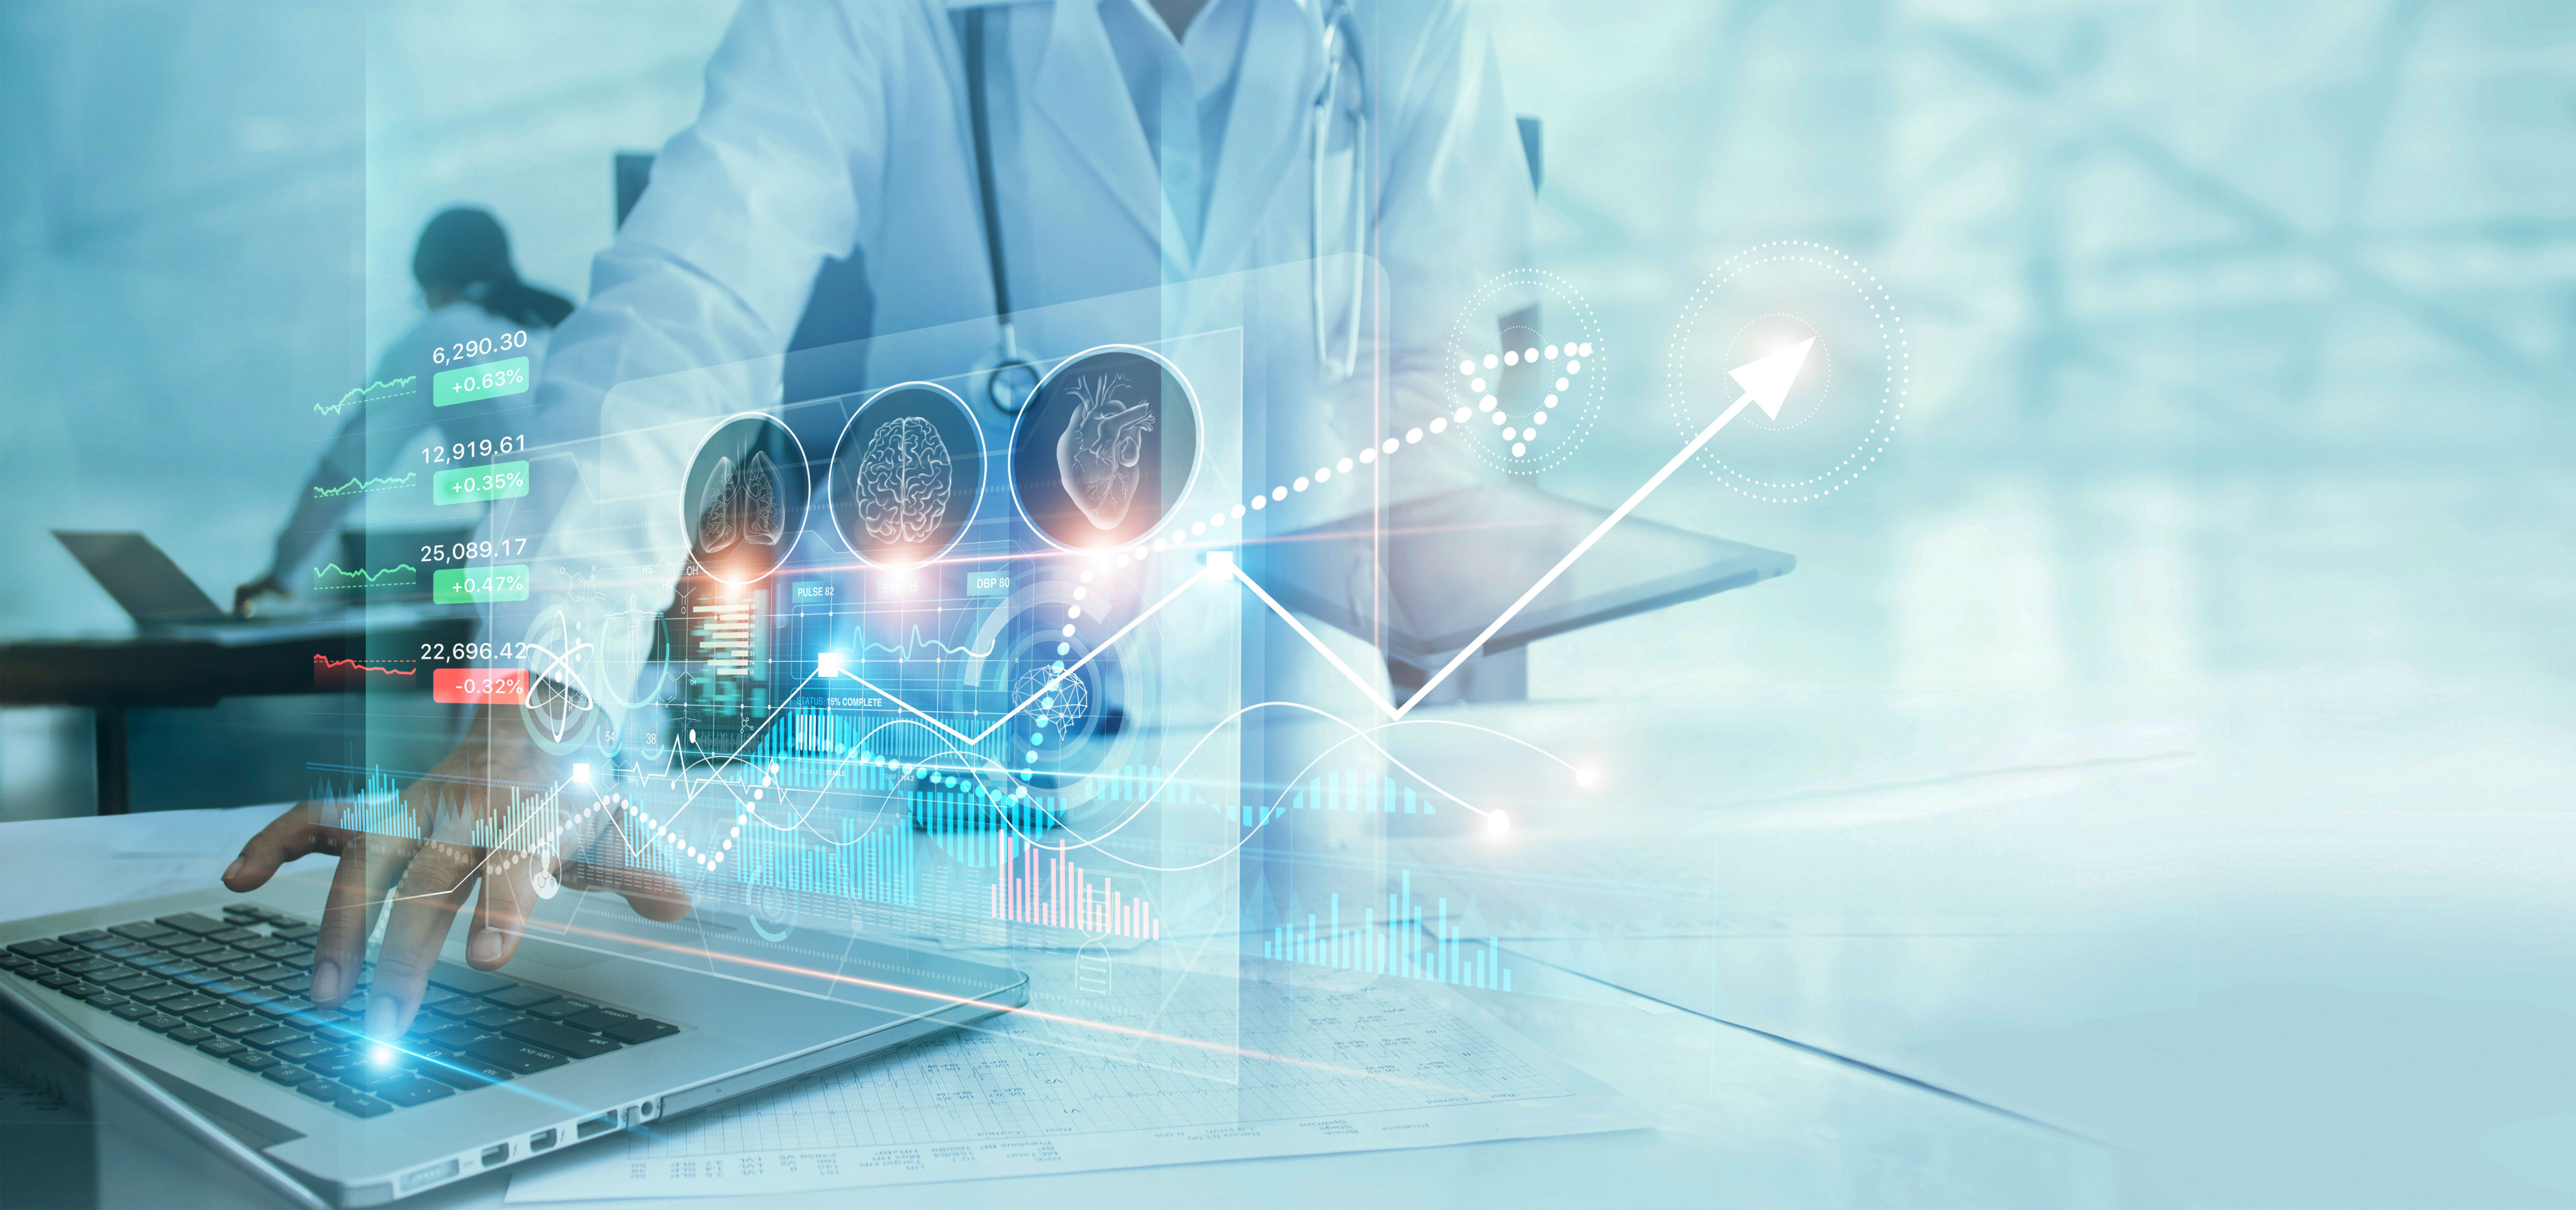 The number and value of private equity deals in the healthcare sector in Asia-Pacific climbed to a new record last year, the report shows. Photo: Shutterstock Images